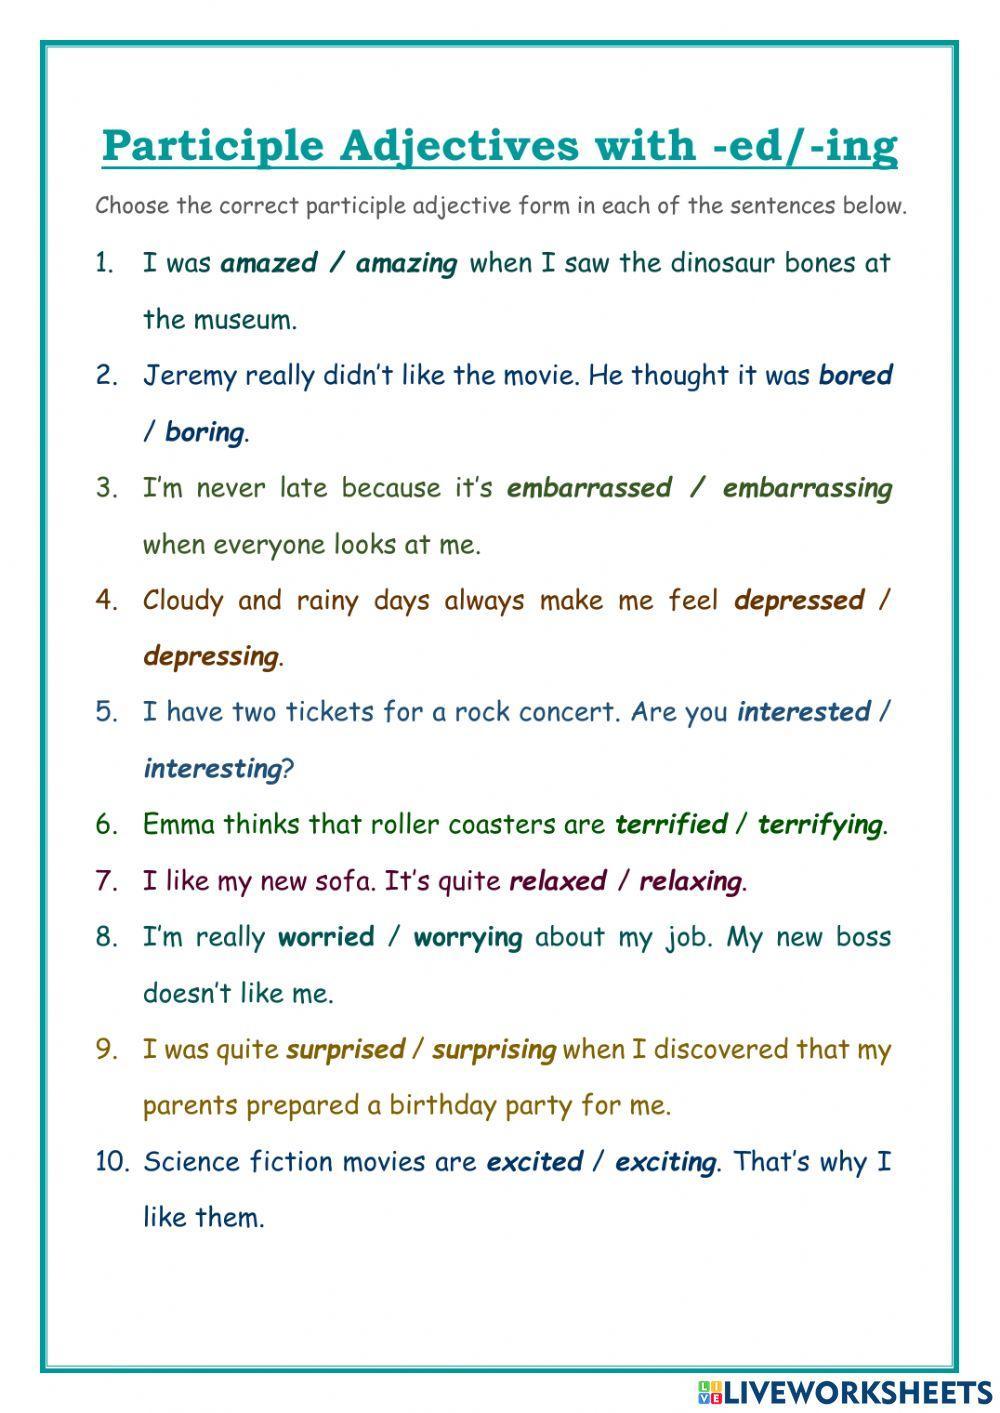 Participle Adjectives ending -ed and -ing